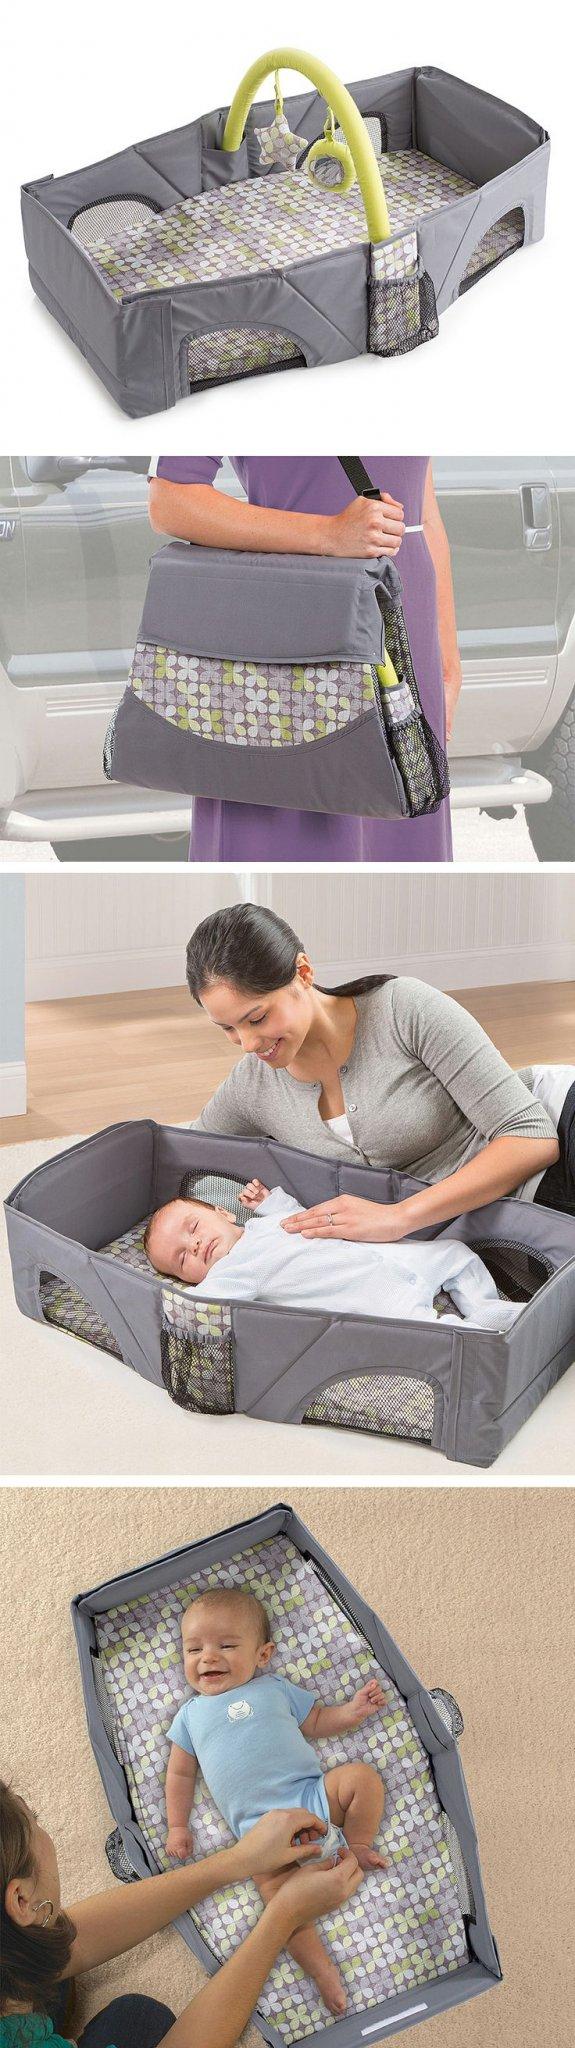 Baby carrying bag - the perfect present